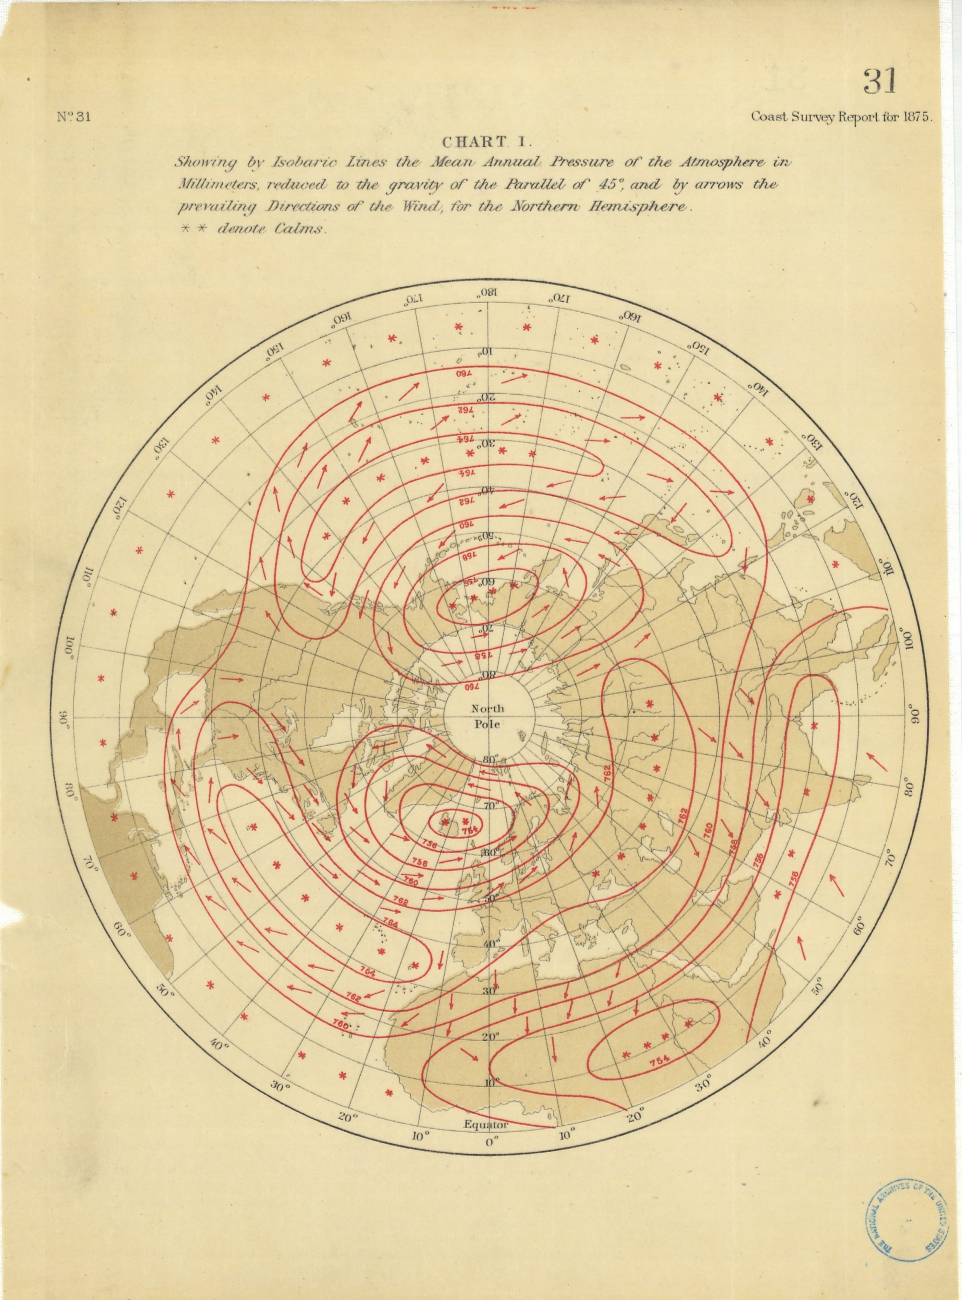 Map showing by isobaric lines the mean annual pressure of the atmosphere inmillimeters